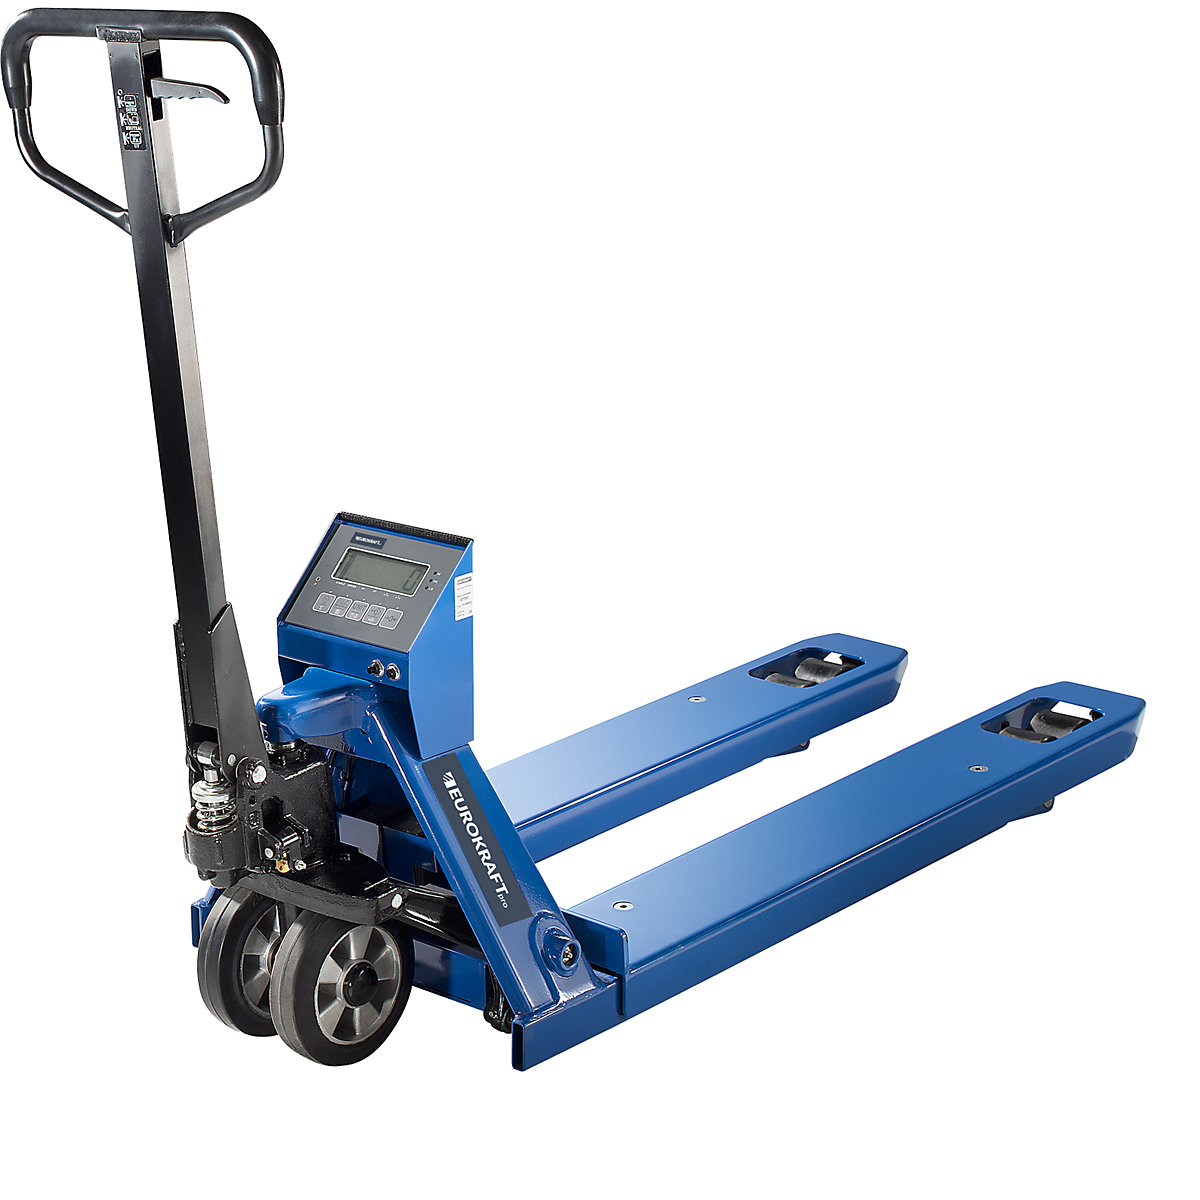 Pallet truck with weighing scale – eurokraft pro